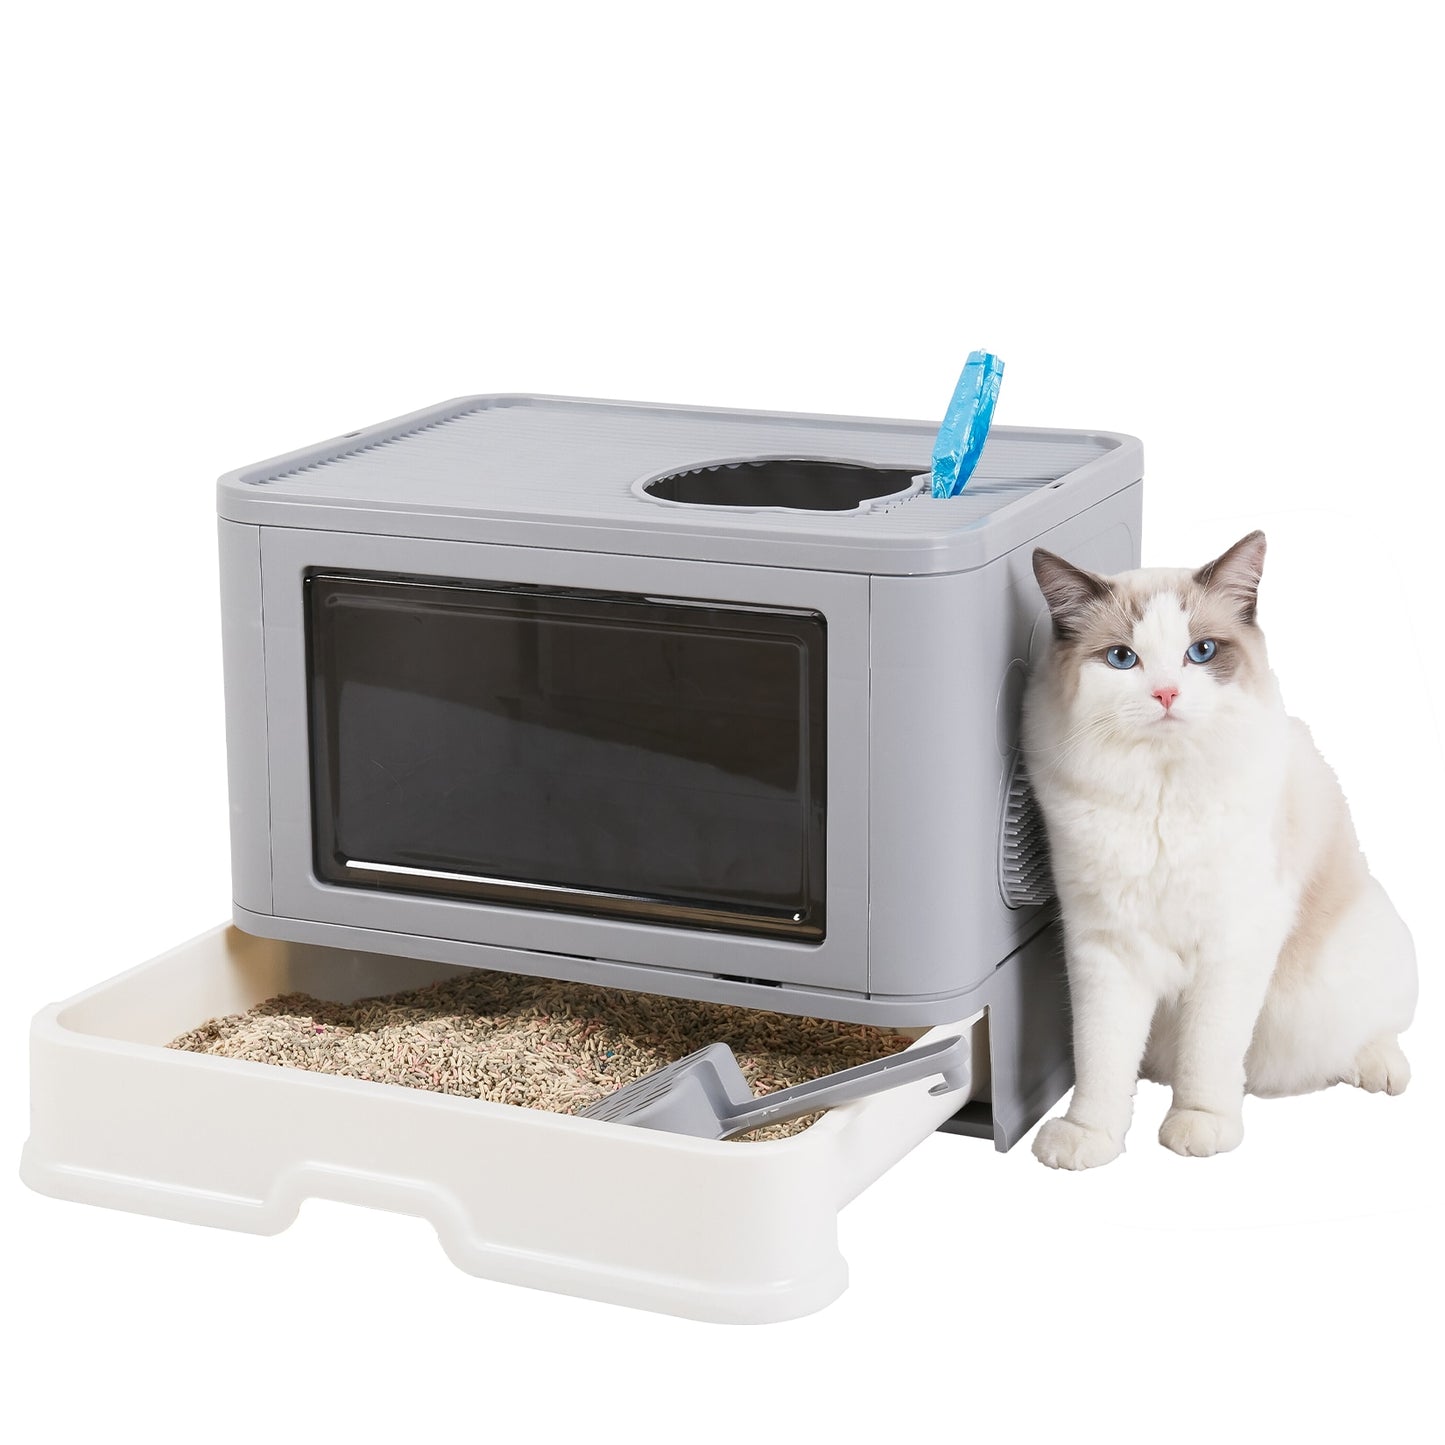 Cat Litter Box Fully Enclosed and Foldable